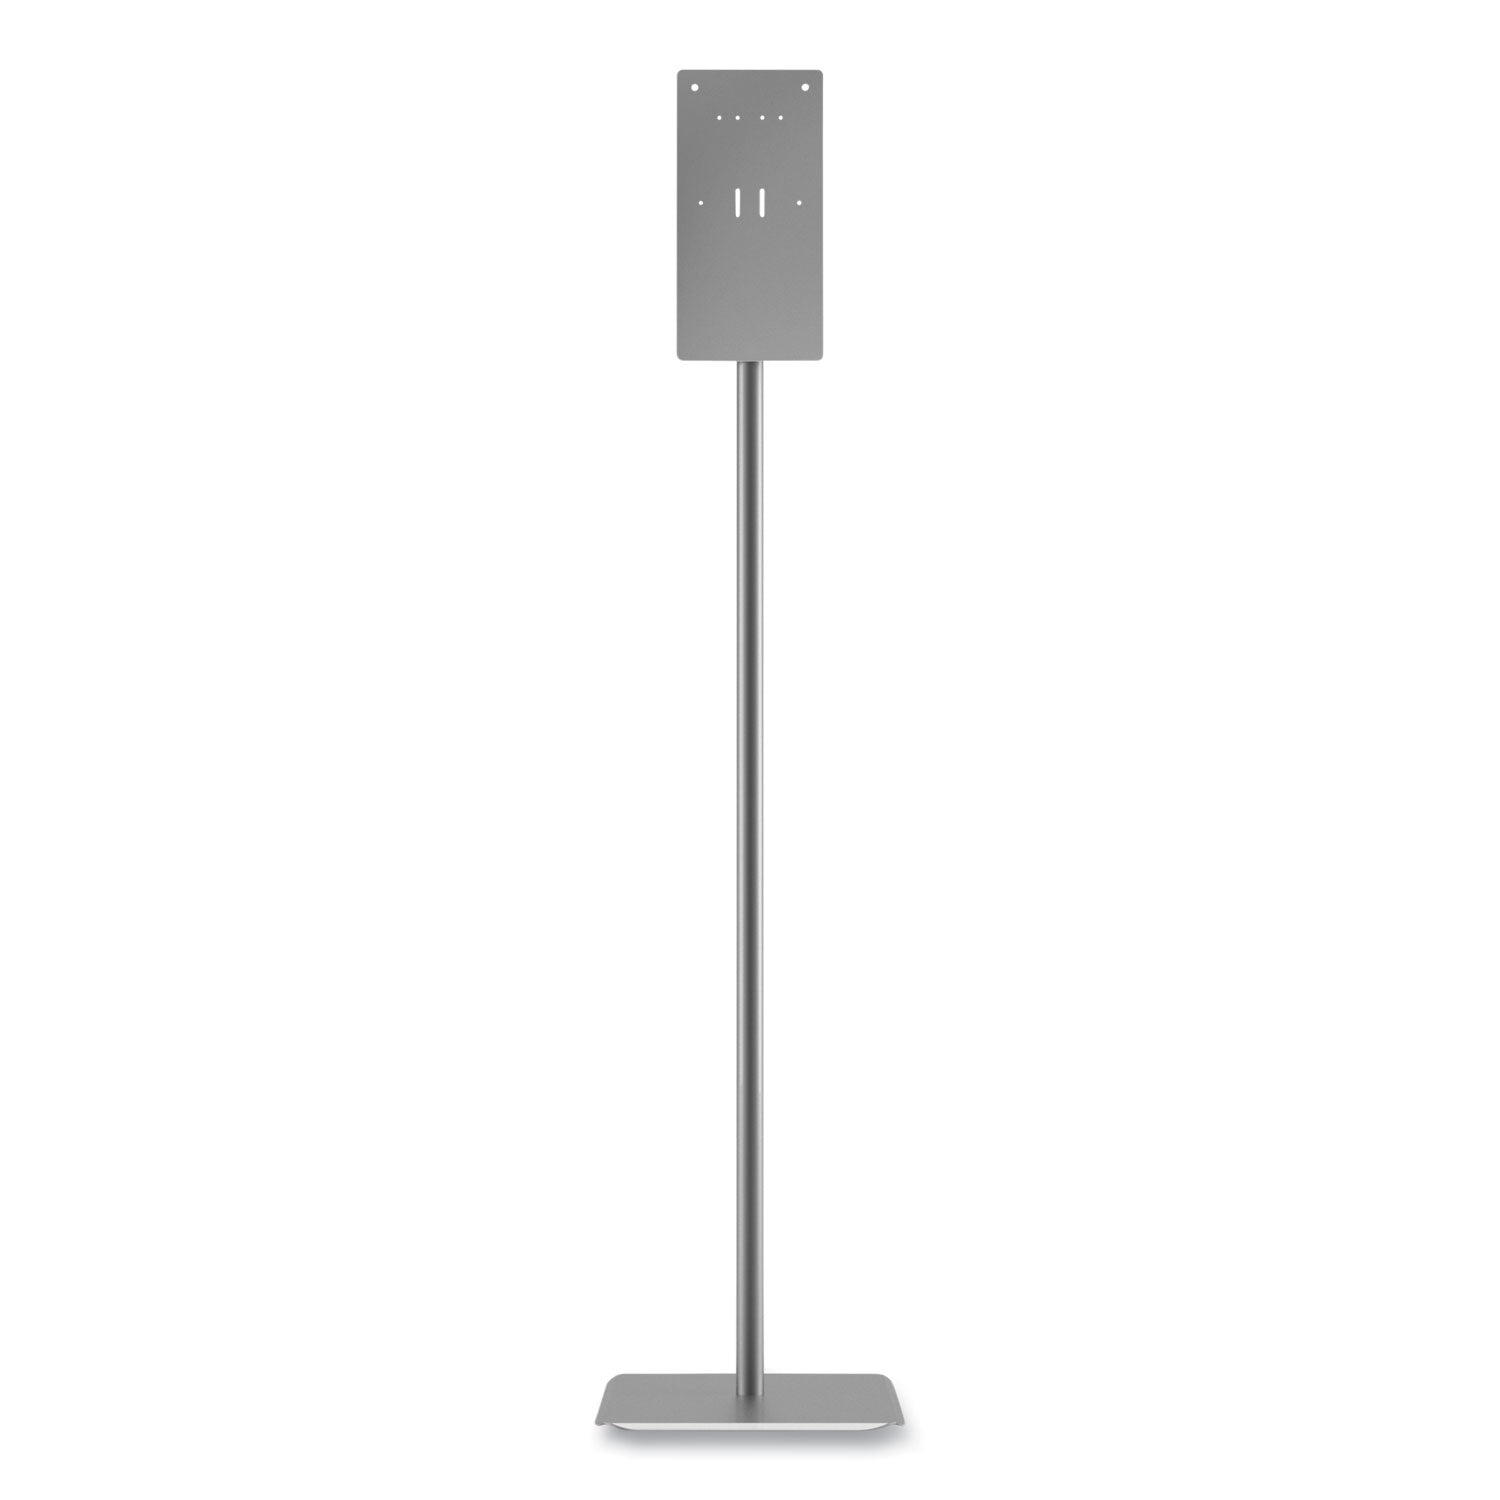 hand-sanitizer-station-stand-12-x-16-x-54-silver_honstandp8t - 3